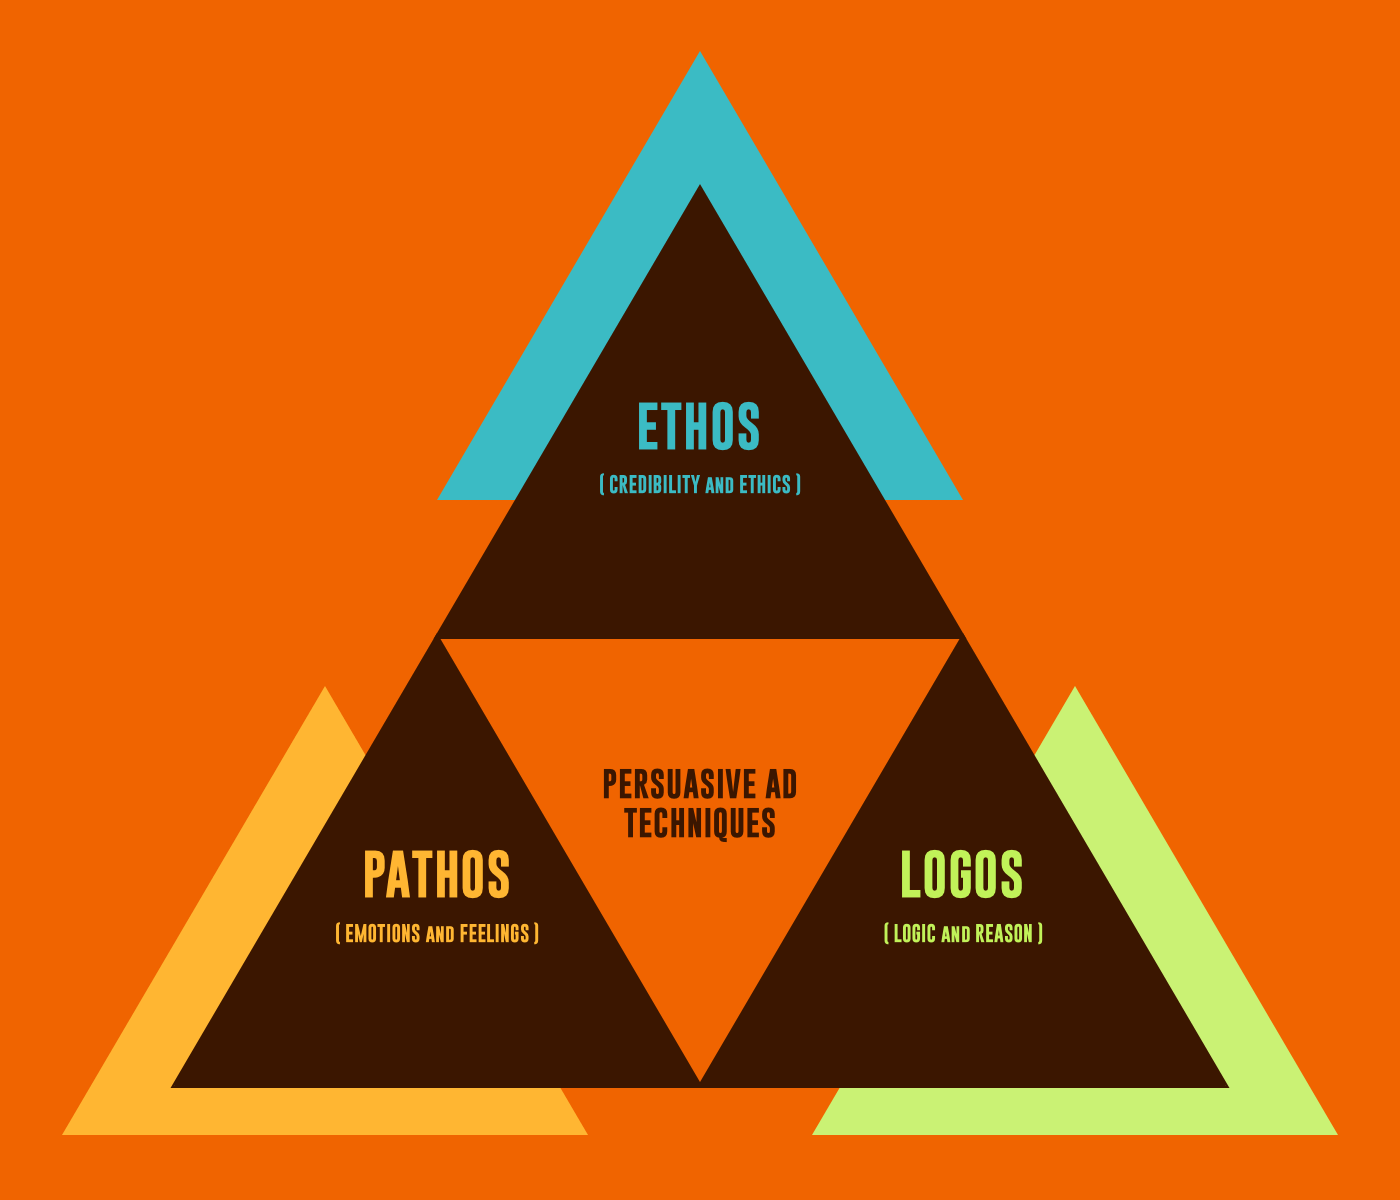 ethos definition and examples